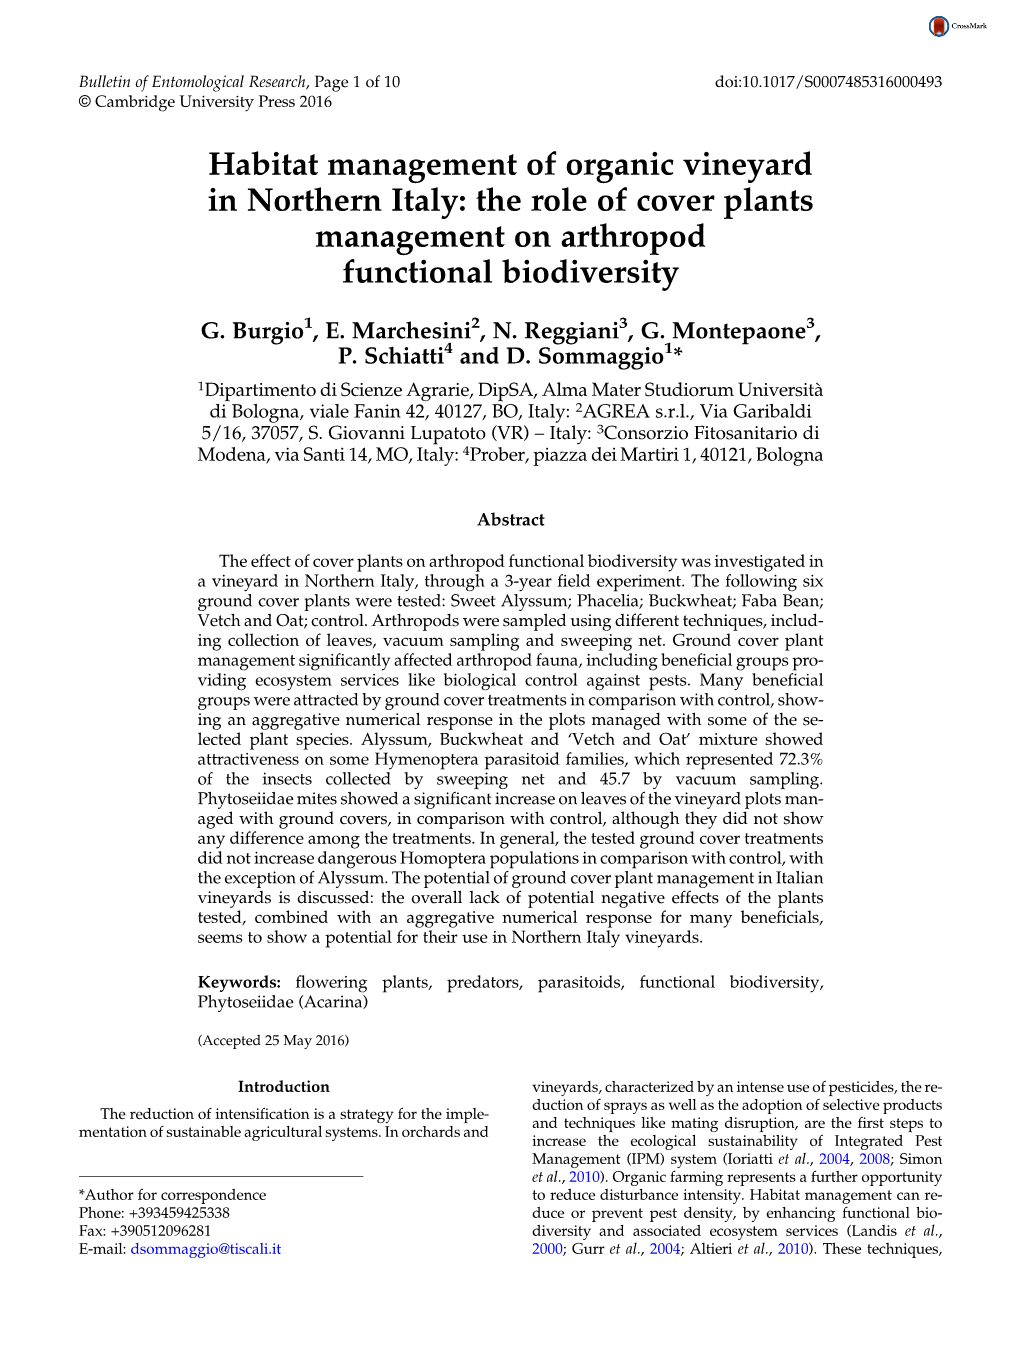 Habitat Management of Organic Vineyard in Northern Italy: the Role of Cover Plants Management on Arthropod Functional Biodiversity